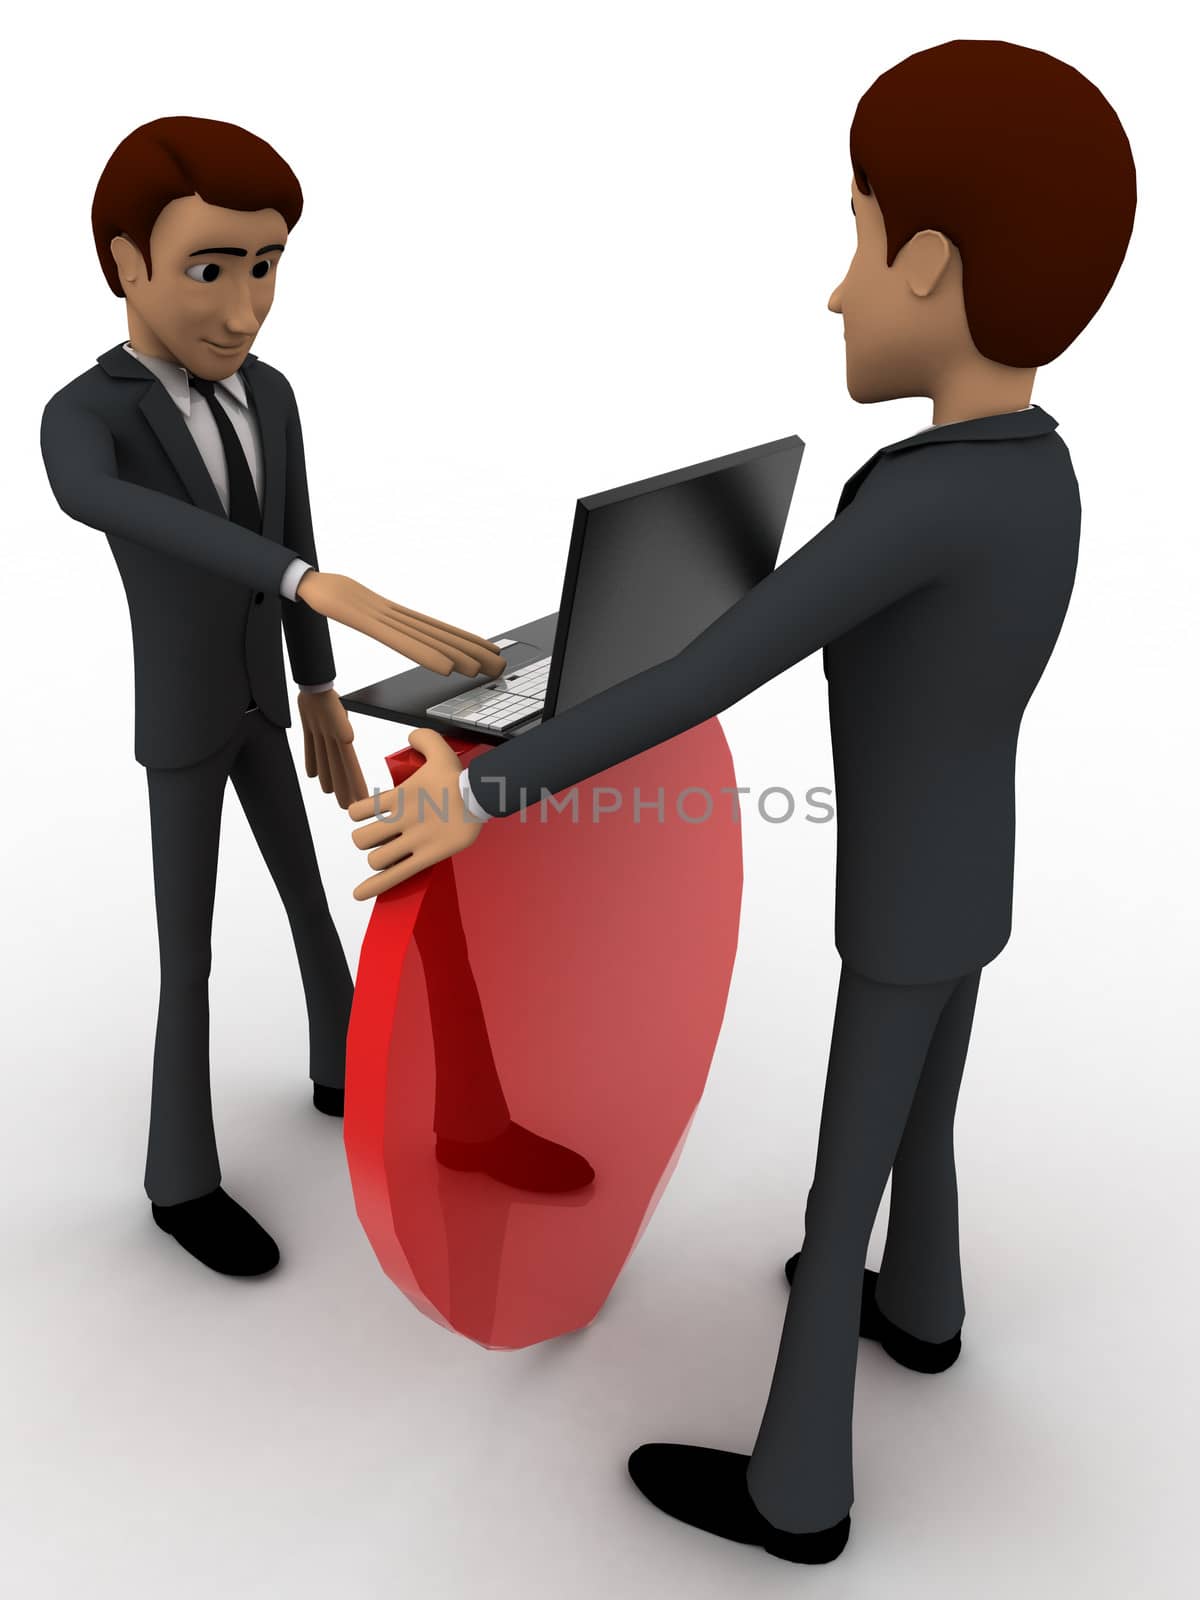 3d man with laptop and shield for security concept by touchmenithin@gmail.com